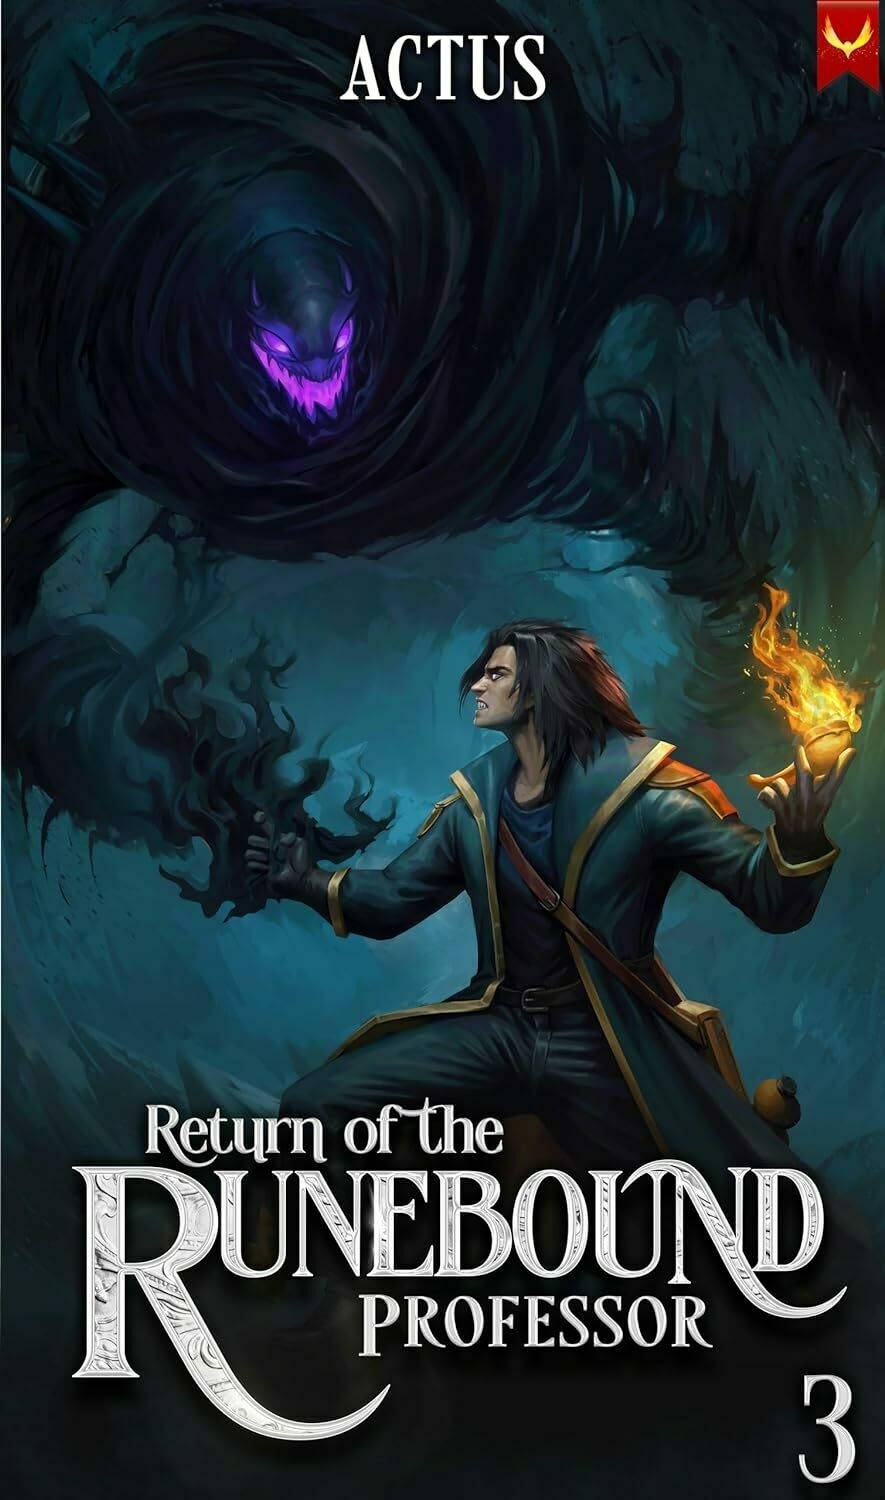 A man conjures fire in his hand, facing a swirling dark vortex with a glowing, menacing entity inside it. Text: 'ACTUS Return of the RUNEBOUND PROFESSOR 3'.